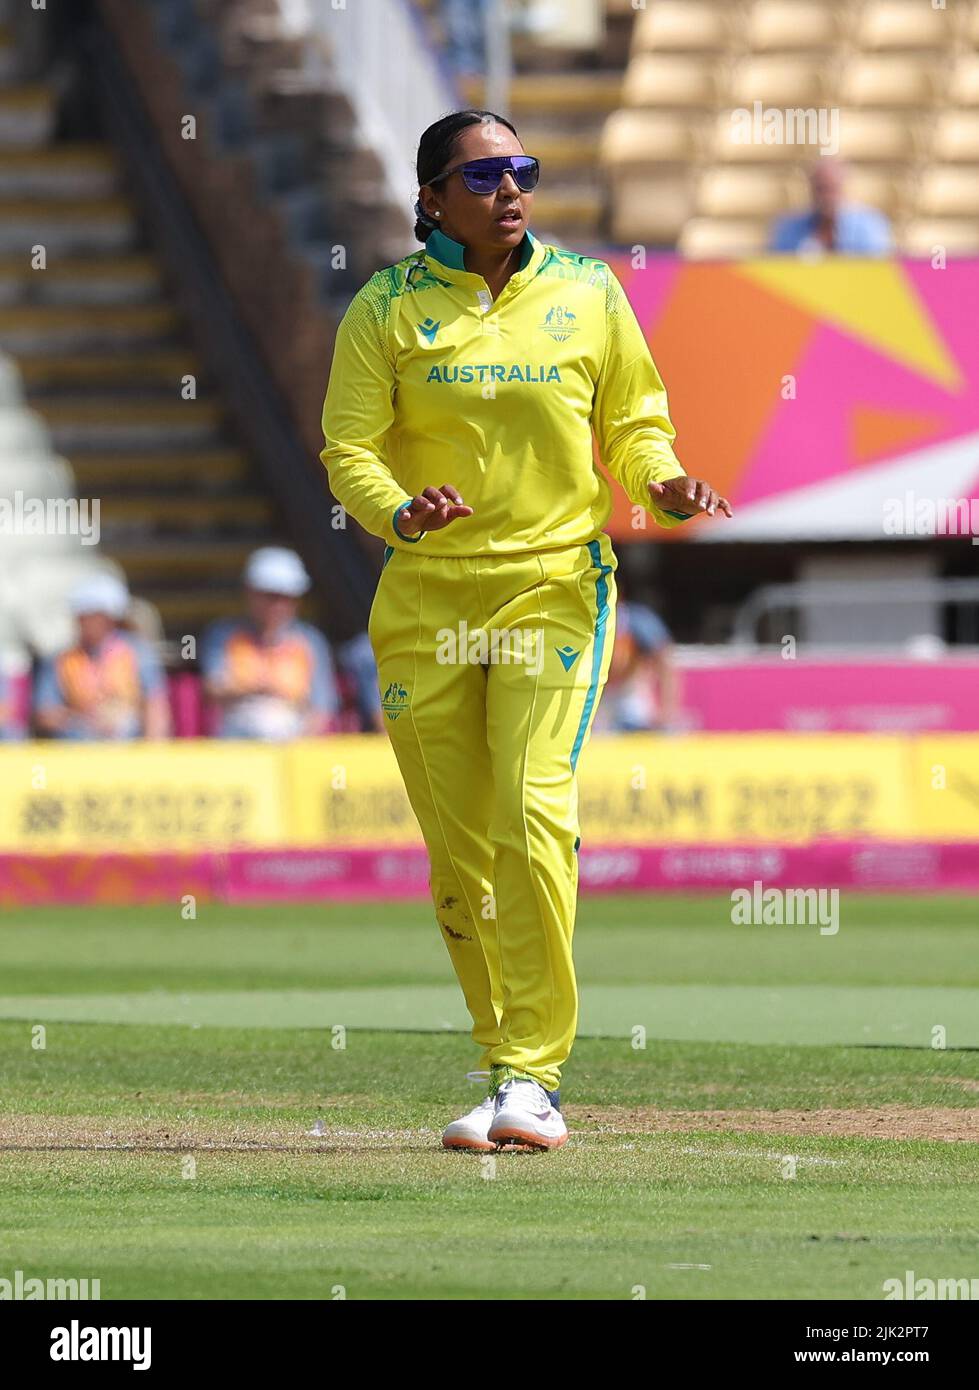 Egsbaston, Birmingham, UK 29th July 2022 Womens T20 Cricket Match between India and Australia; Australia won by 3 wickets inspite of excellent performance by Indian women players